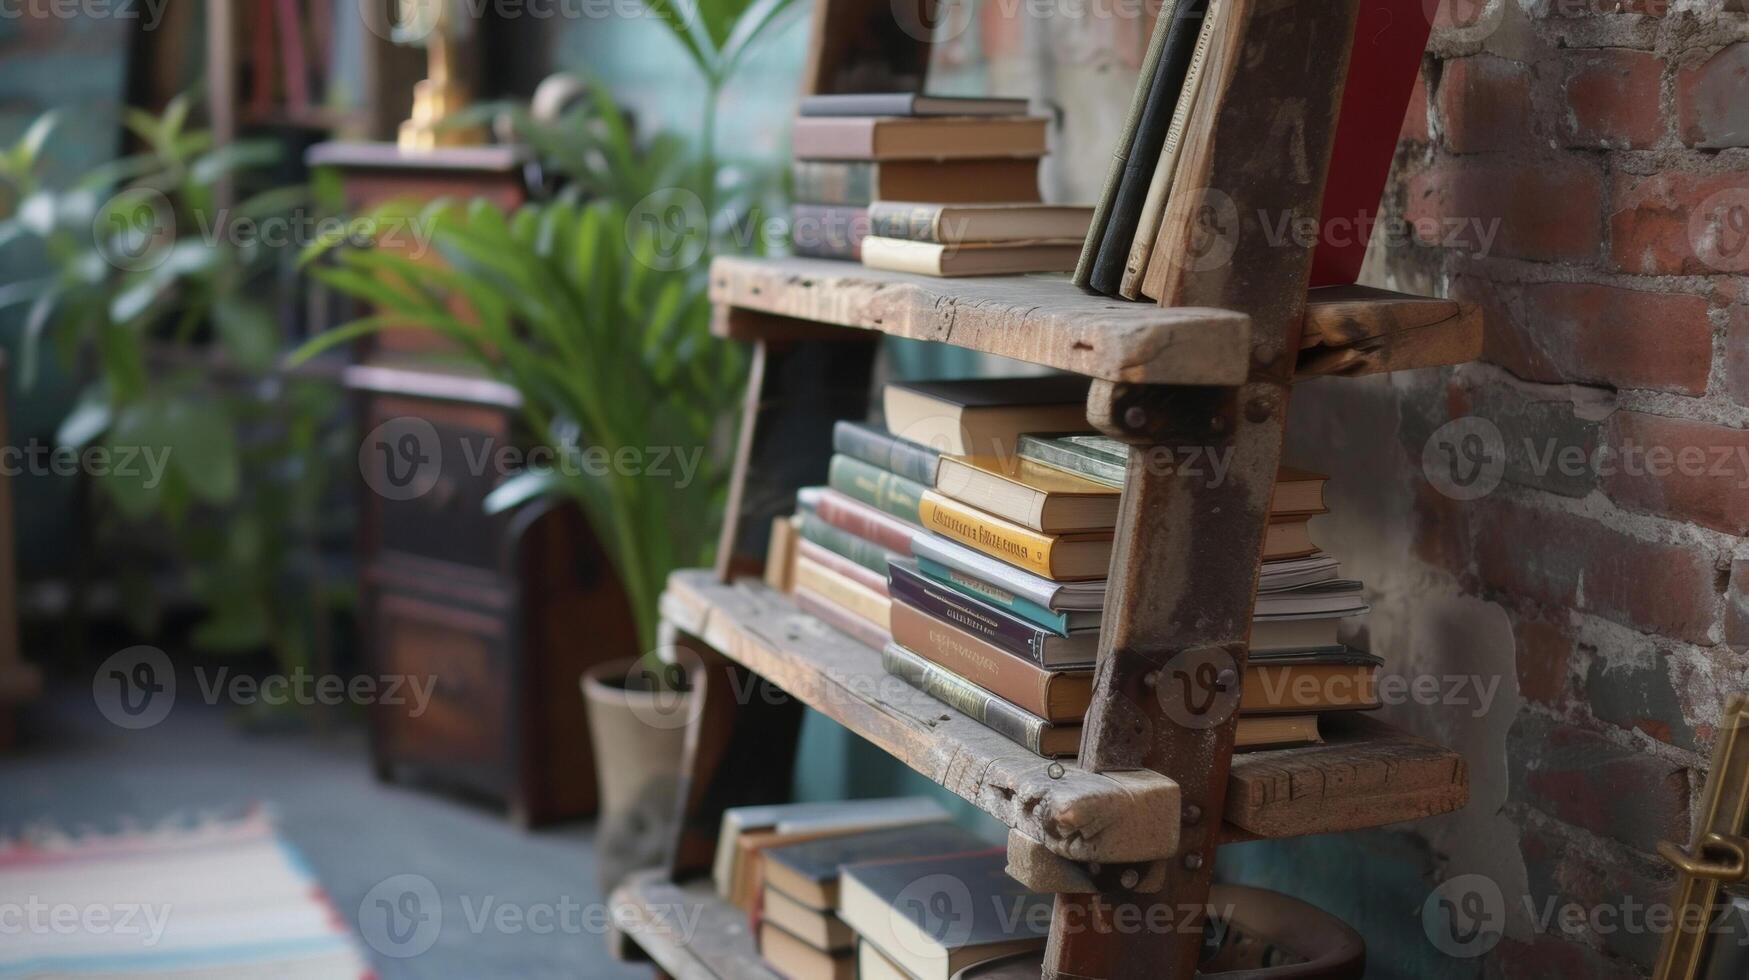 An old ladder has been transformed into a unique and functional bookshelf with each step serving as a shelf for books and decor photo